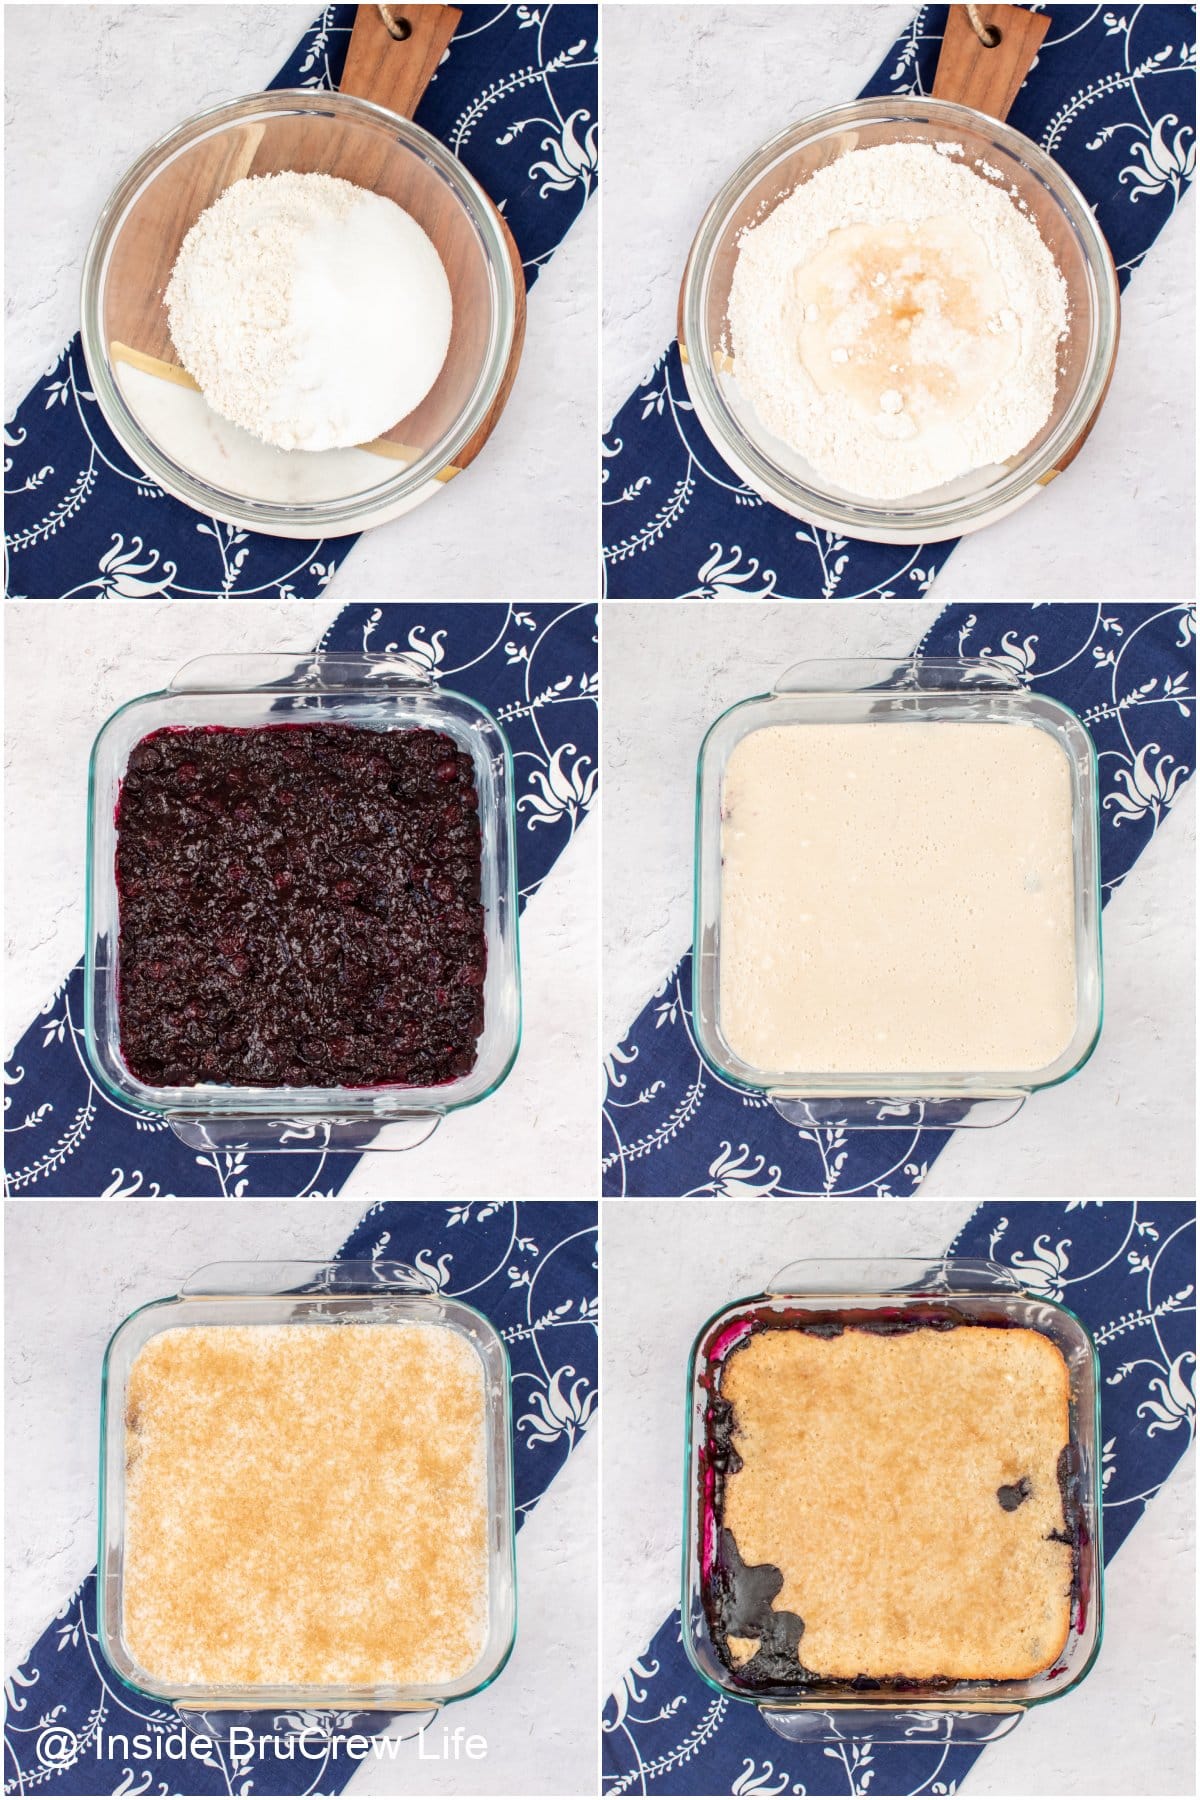 Six pictures collaged together showing how to make a fruit cobbler.